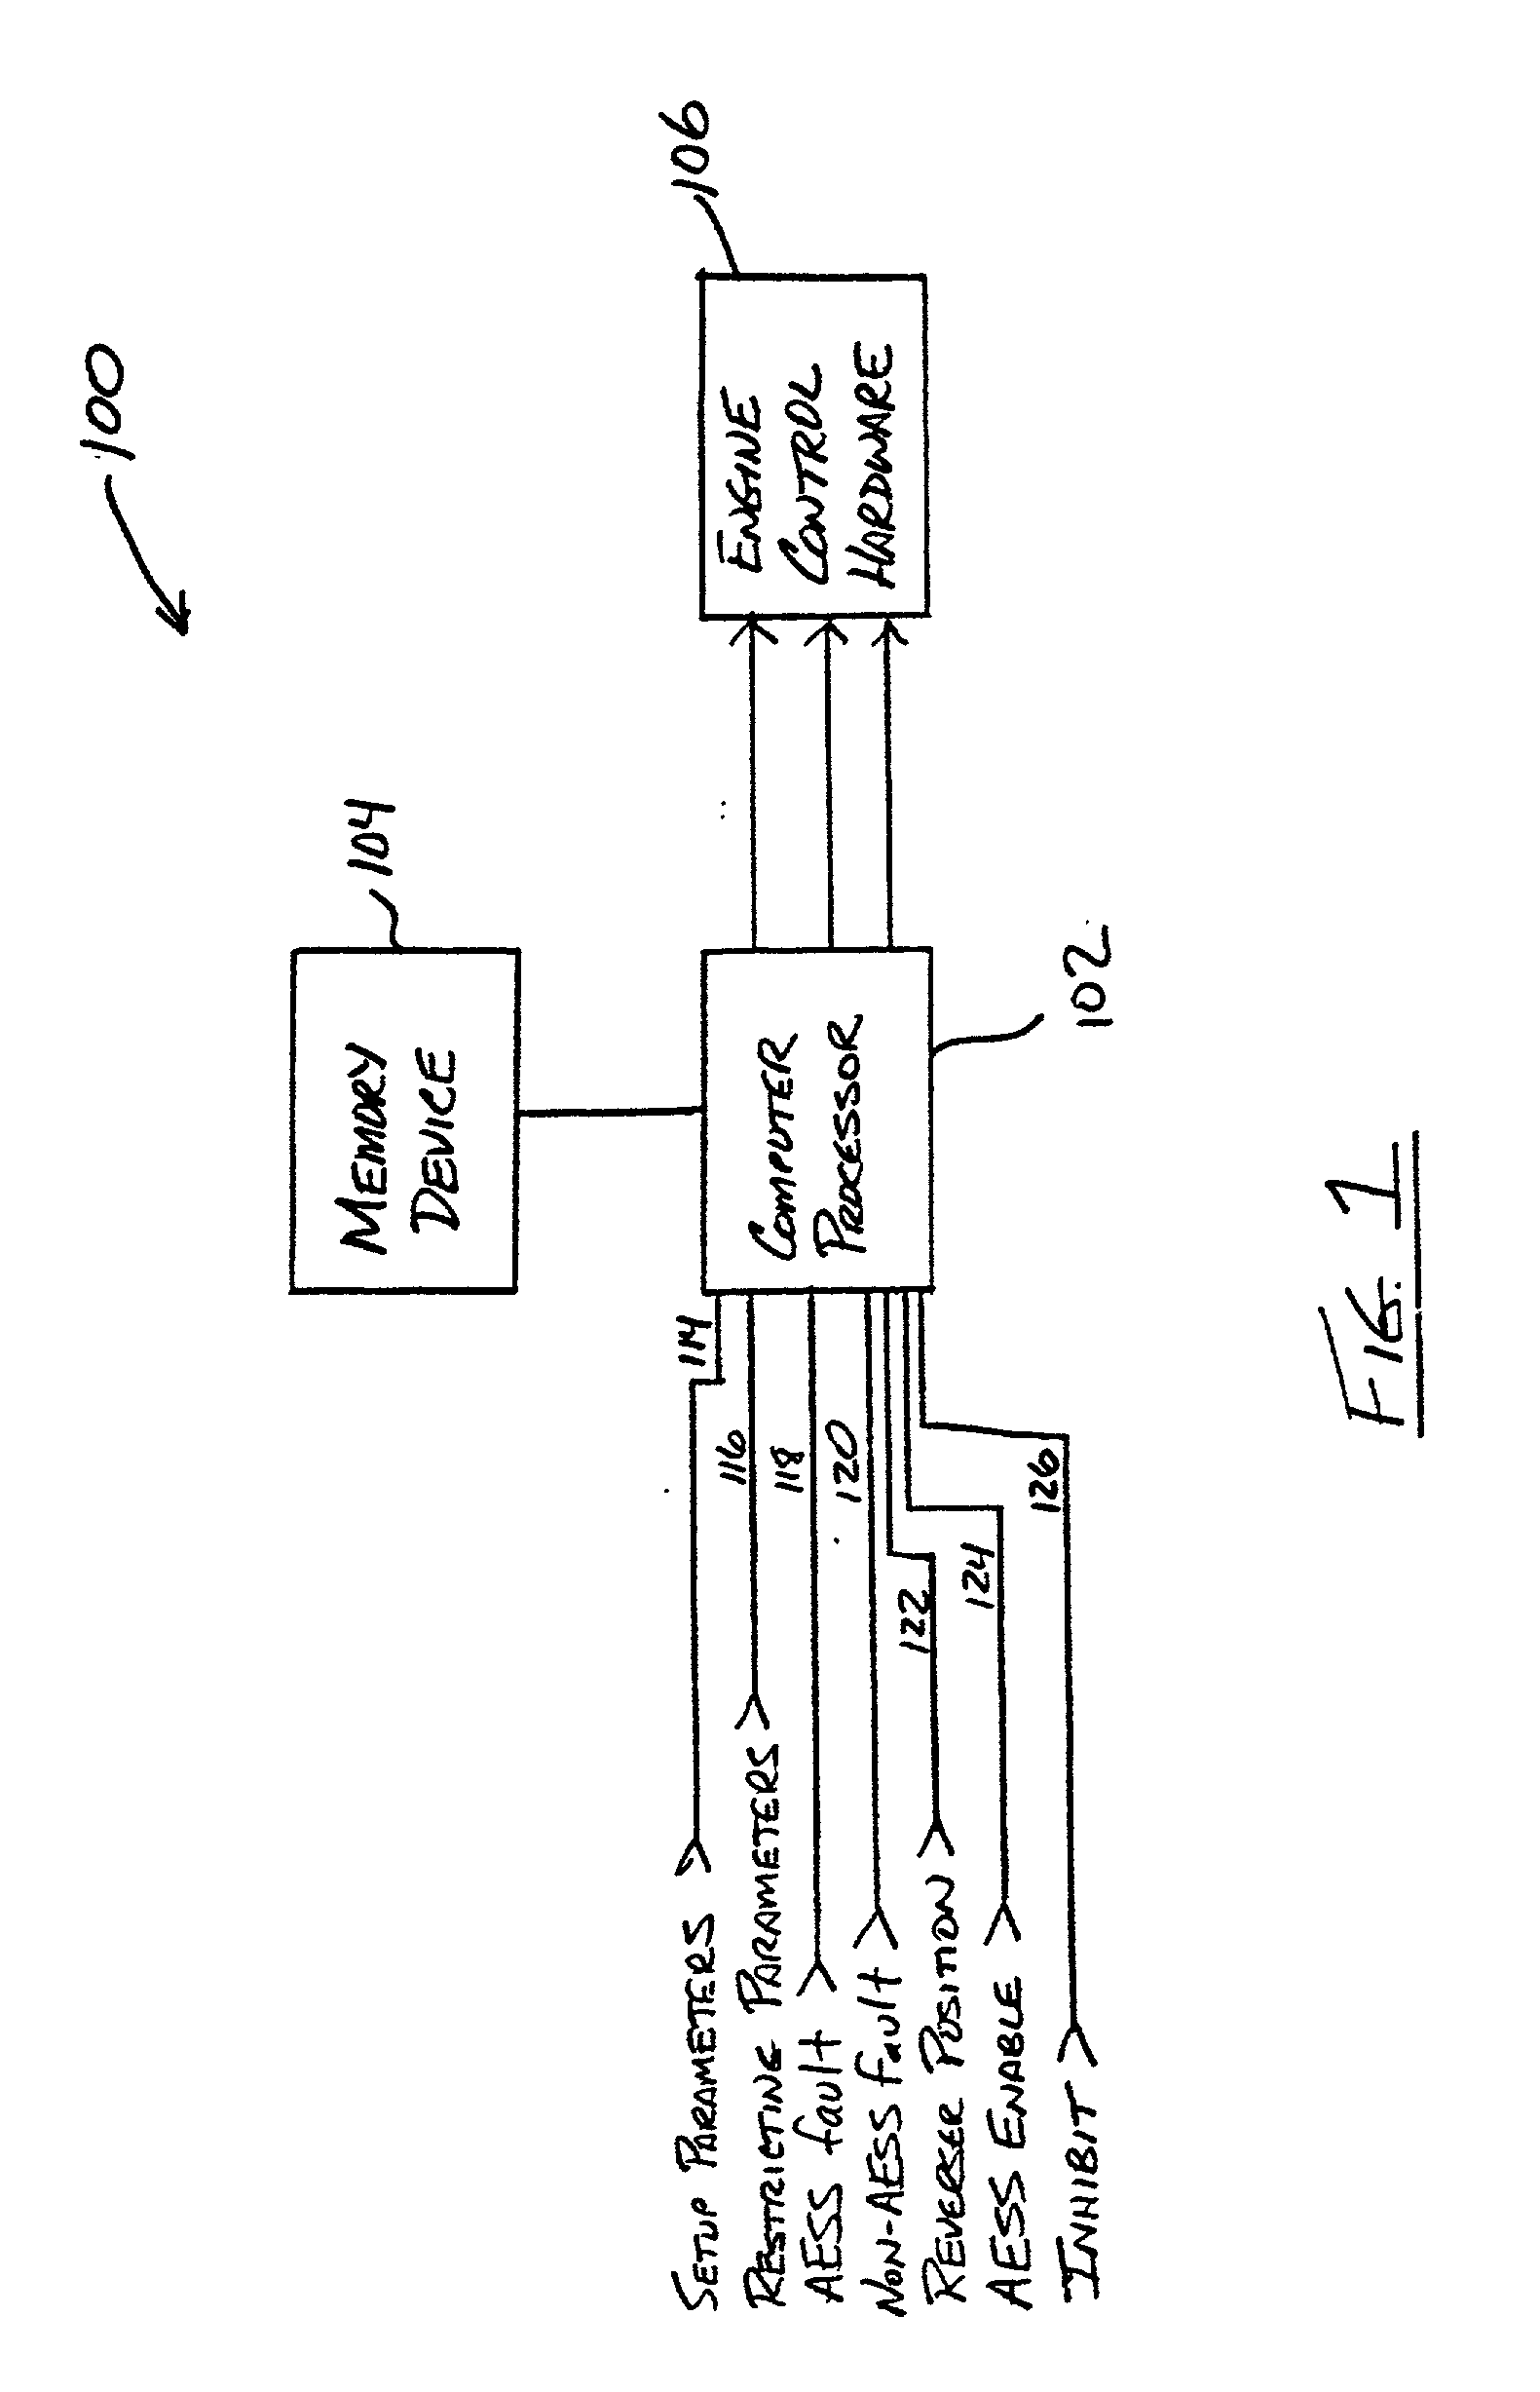 System and method for monitoring locomotive operation